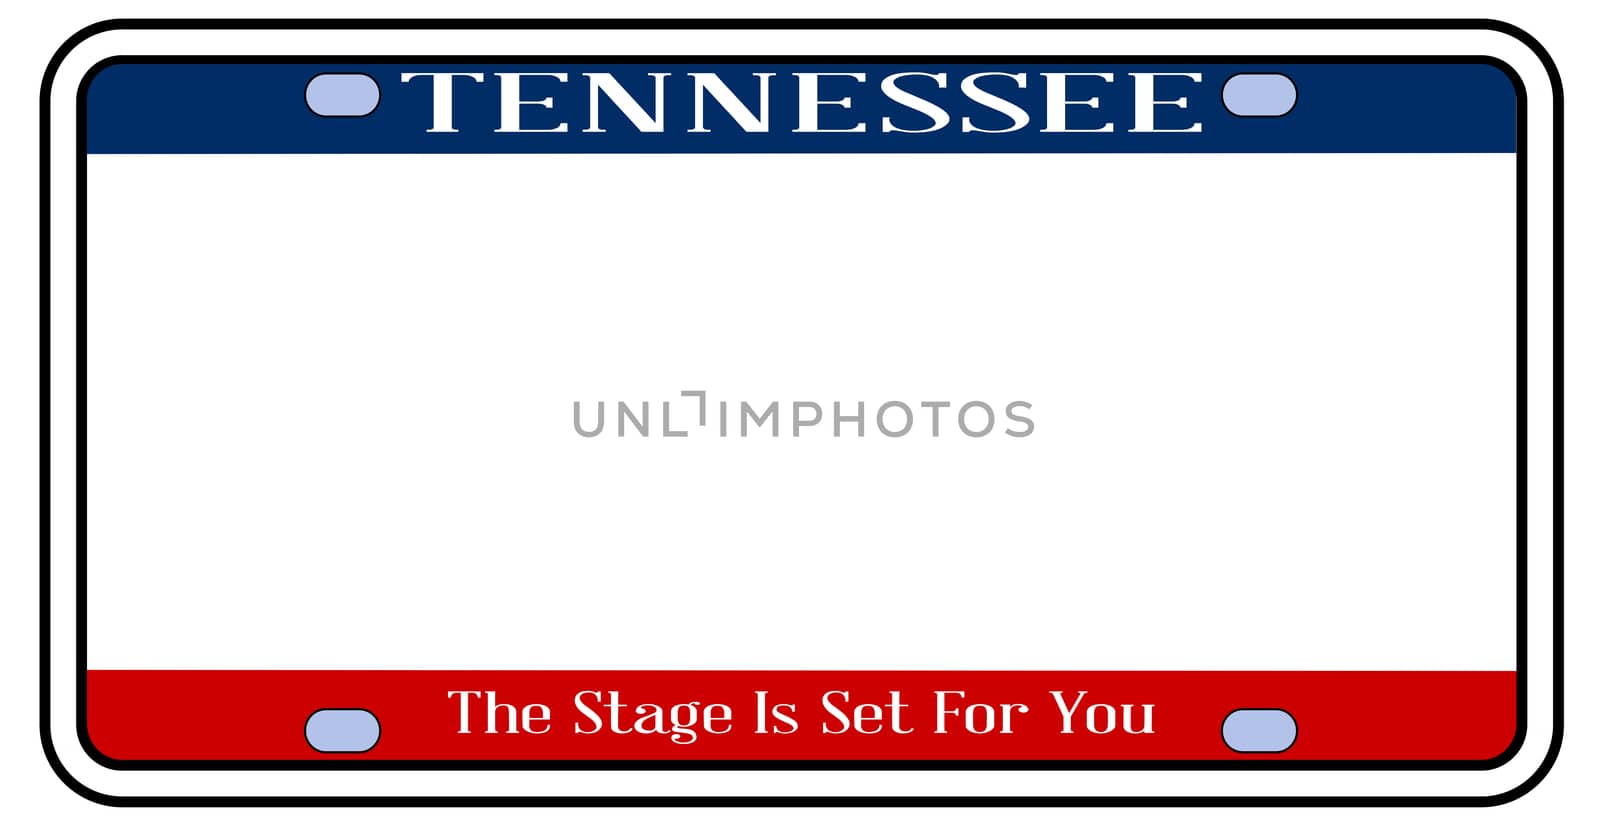 Blank Tennessee state license plate in the colors of the state flag over a white background